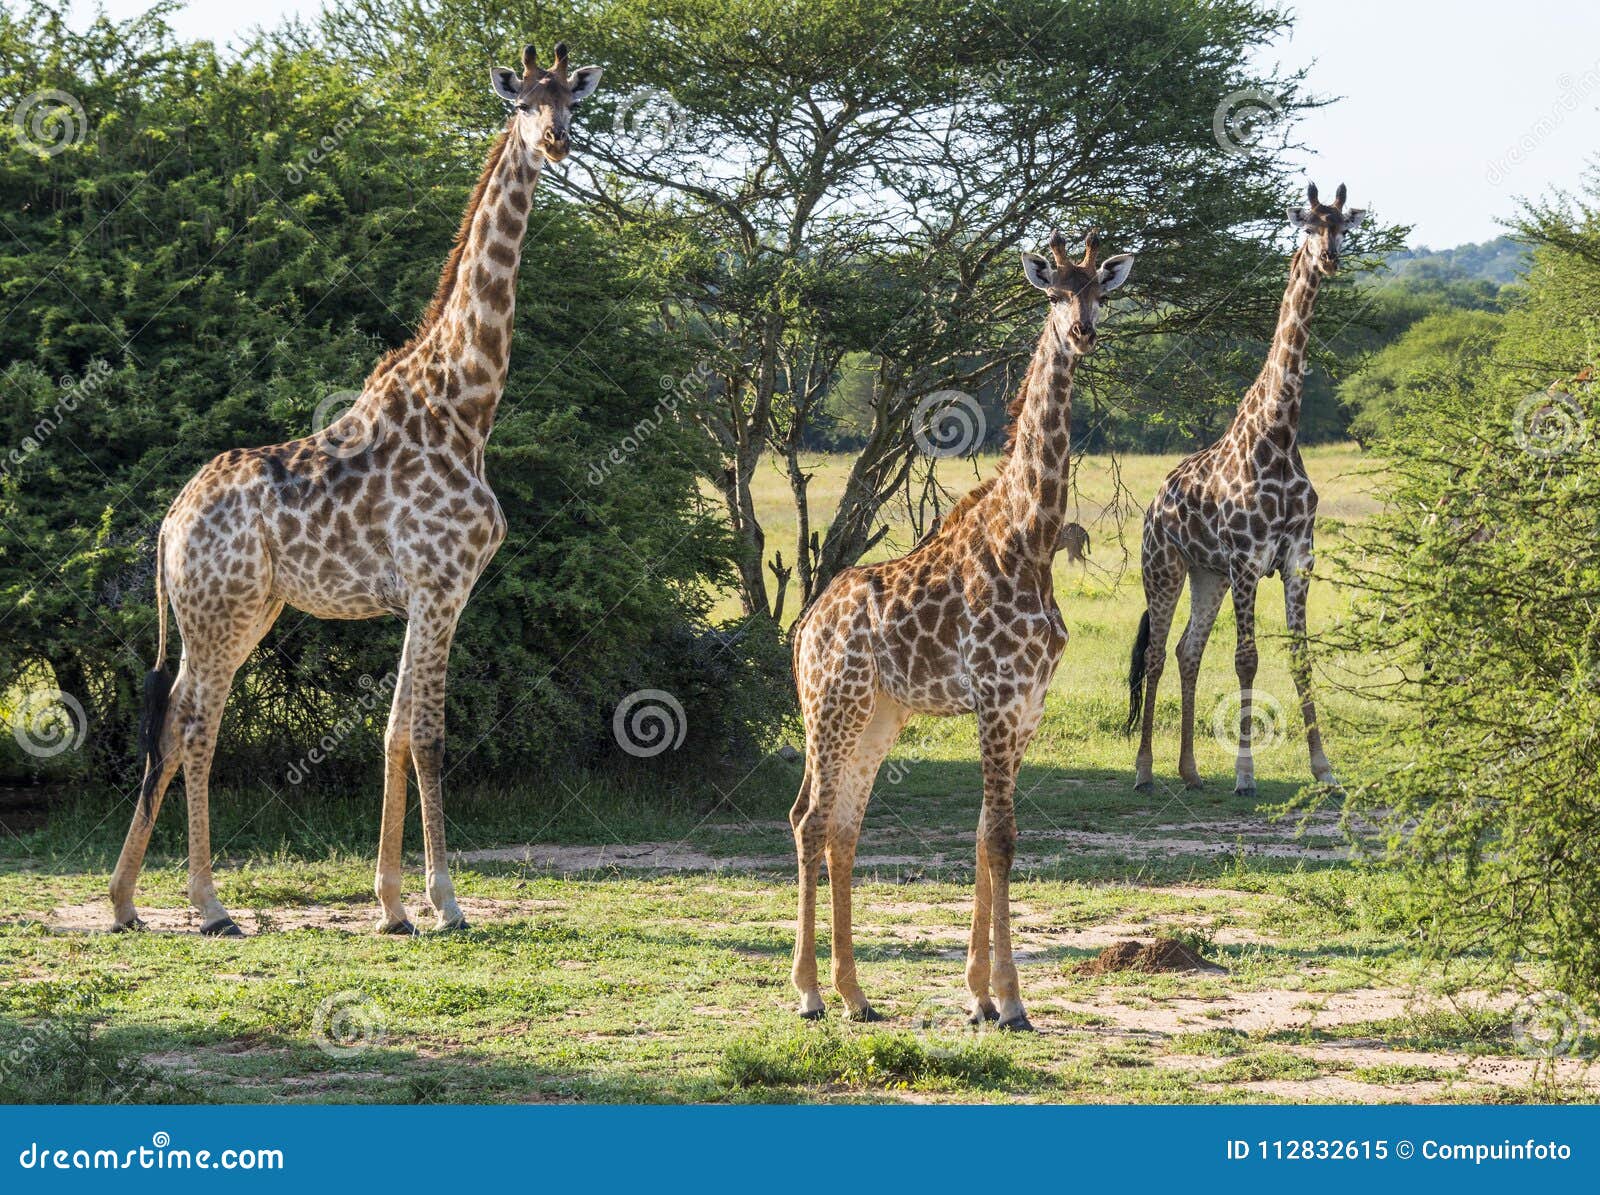 Giraffes in the Wild in South Africa Stock Image - Image of drive, green:  112832615